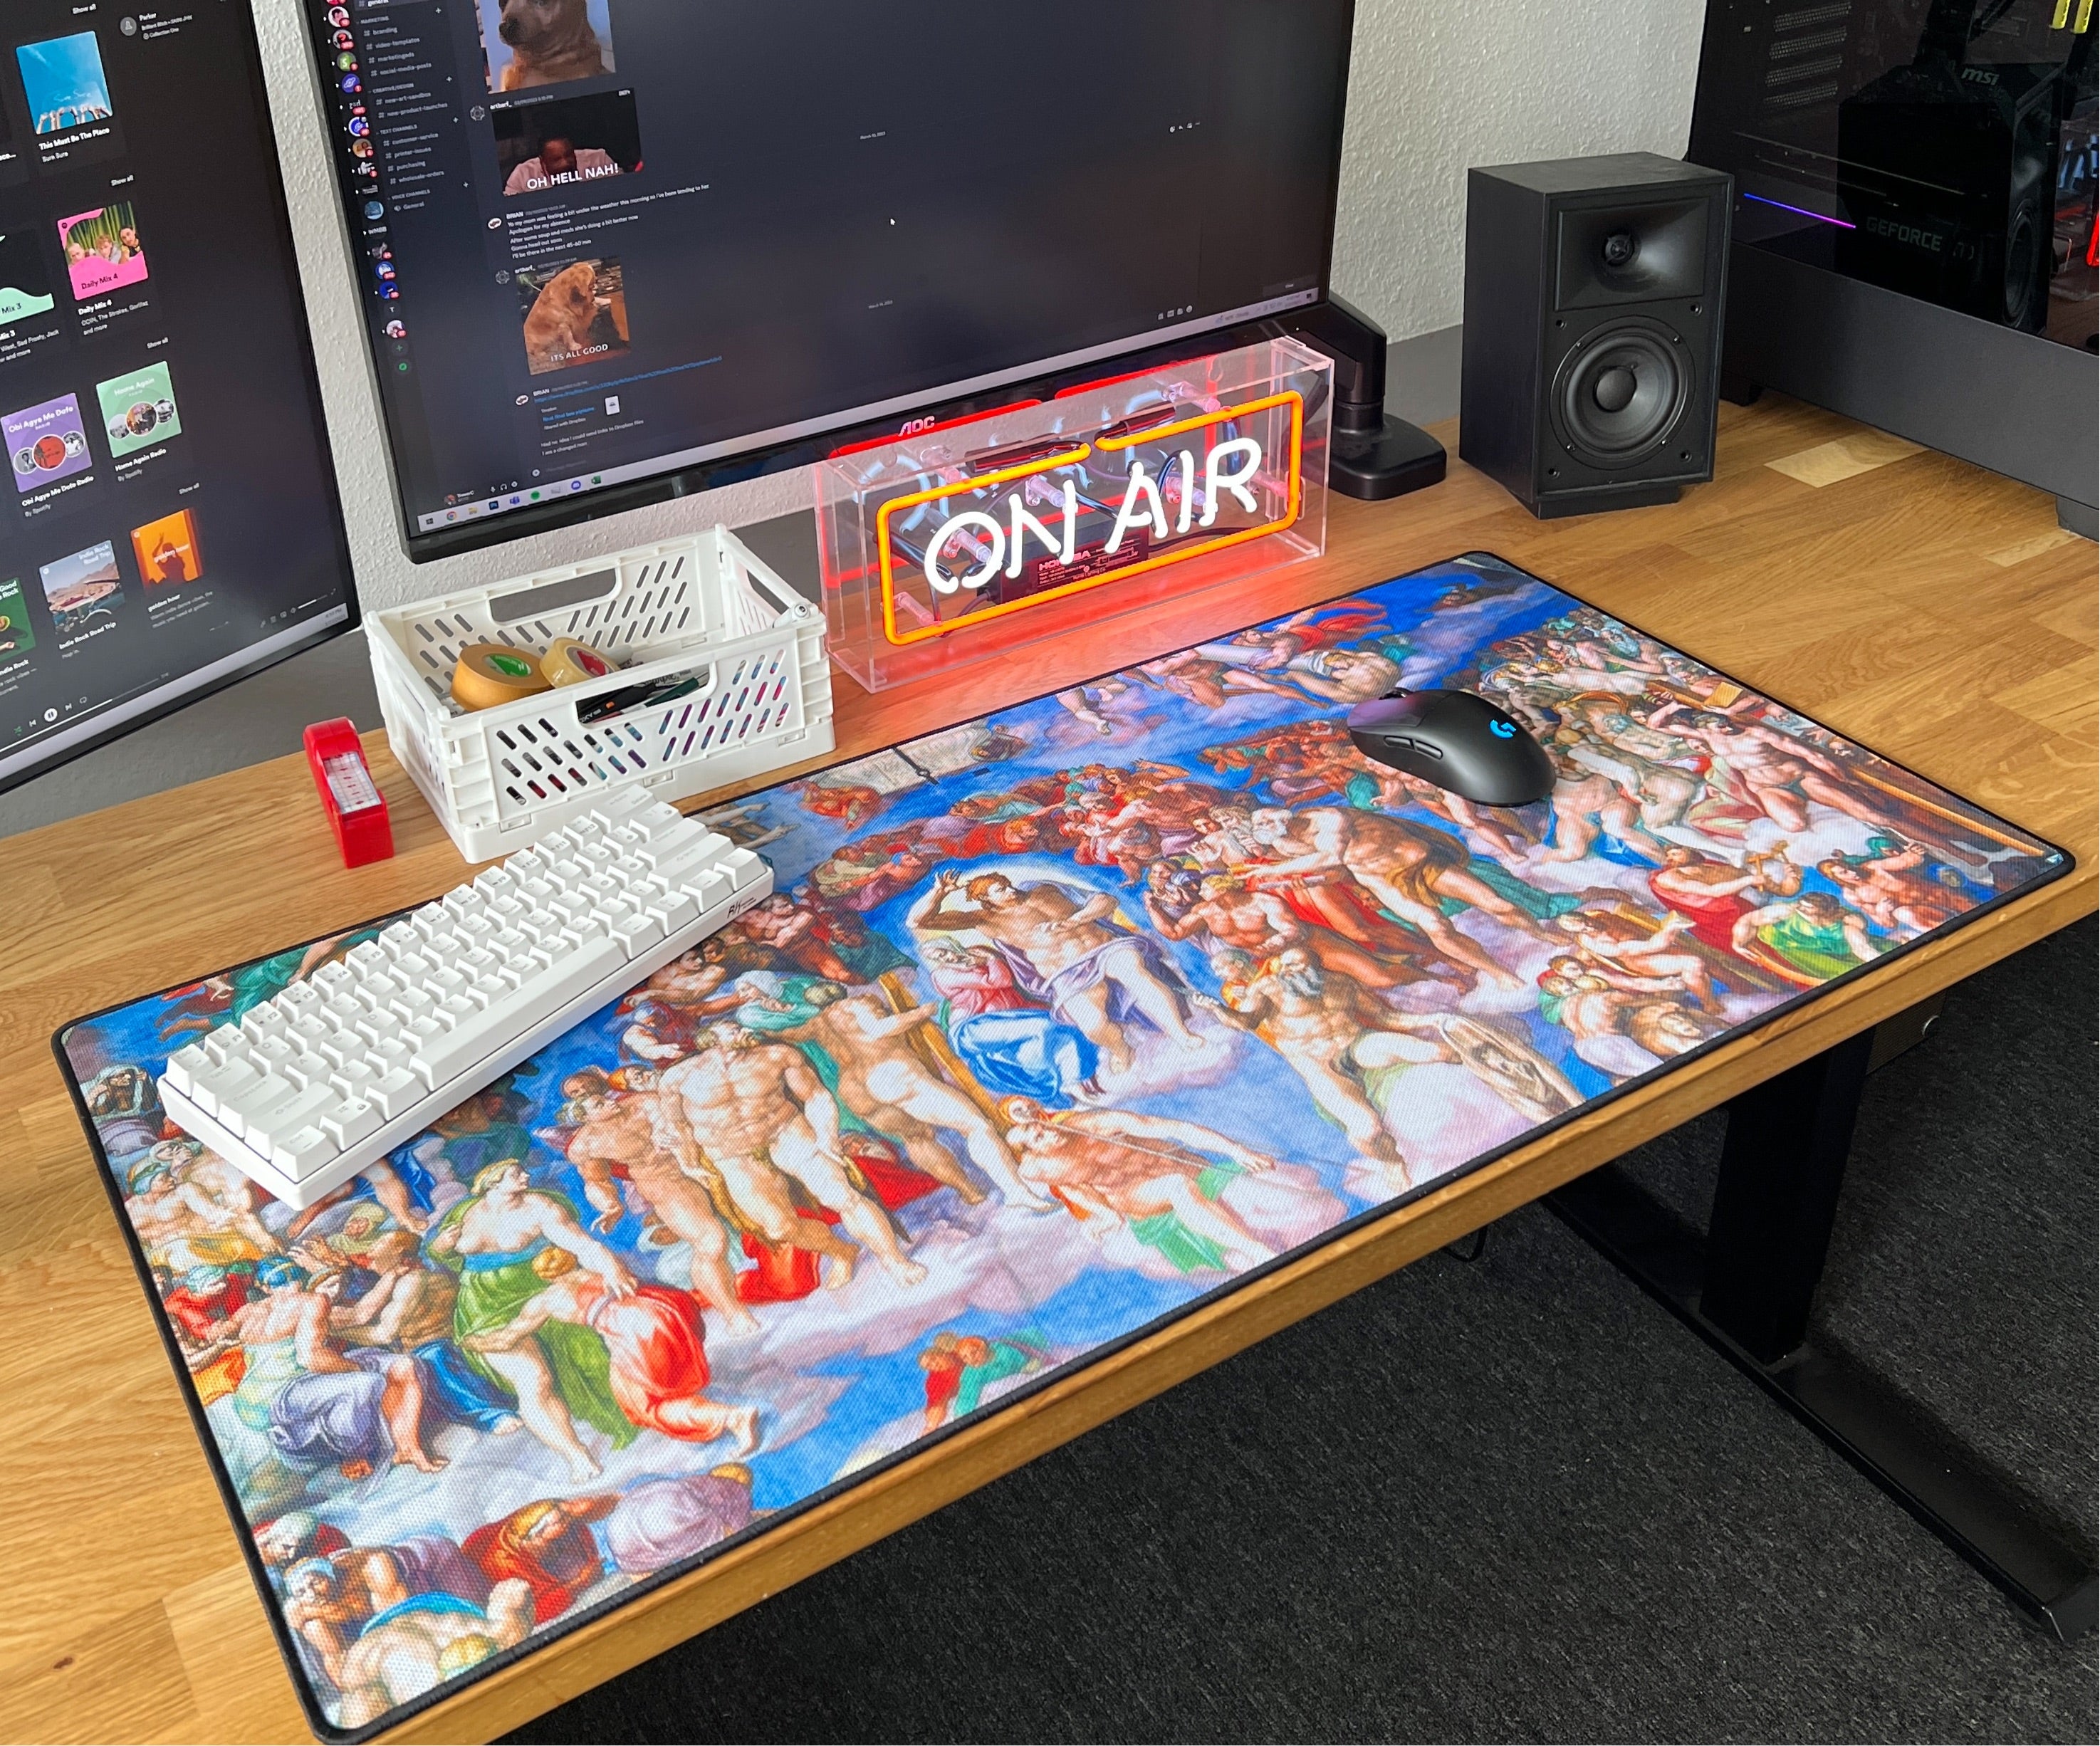 The Last Judgement, by Michelangelo - The Mousepad Company